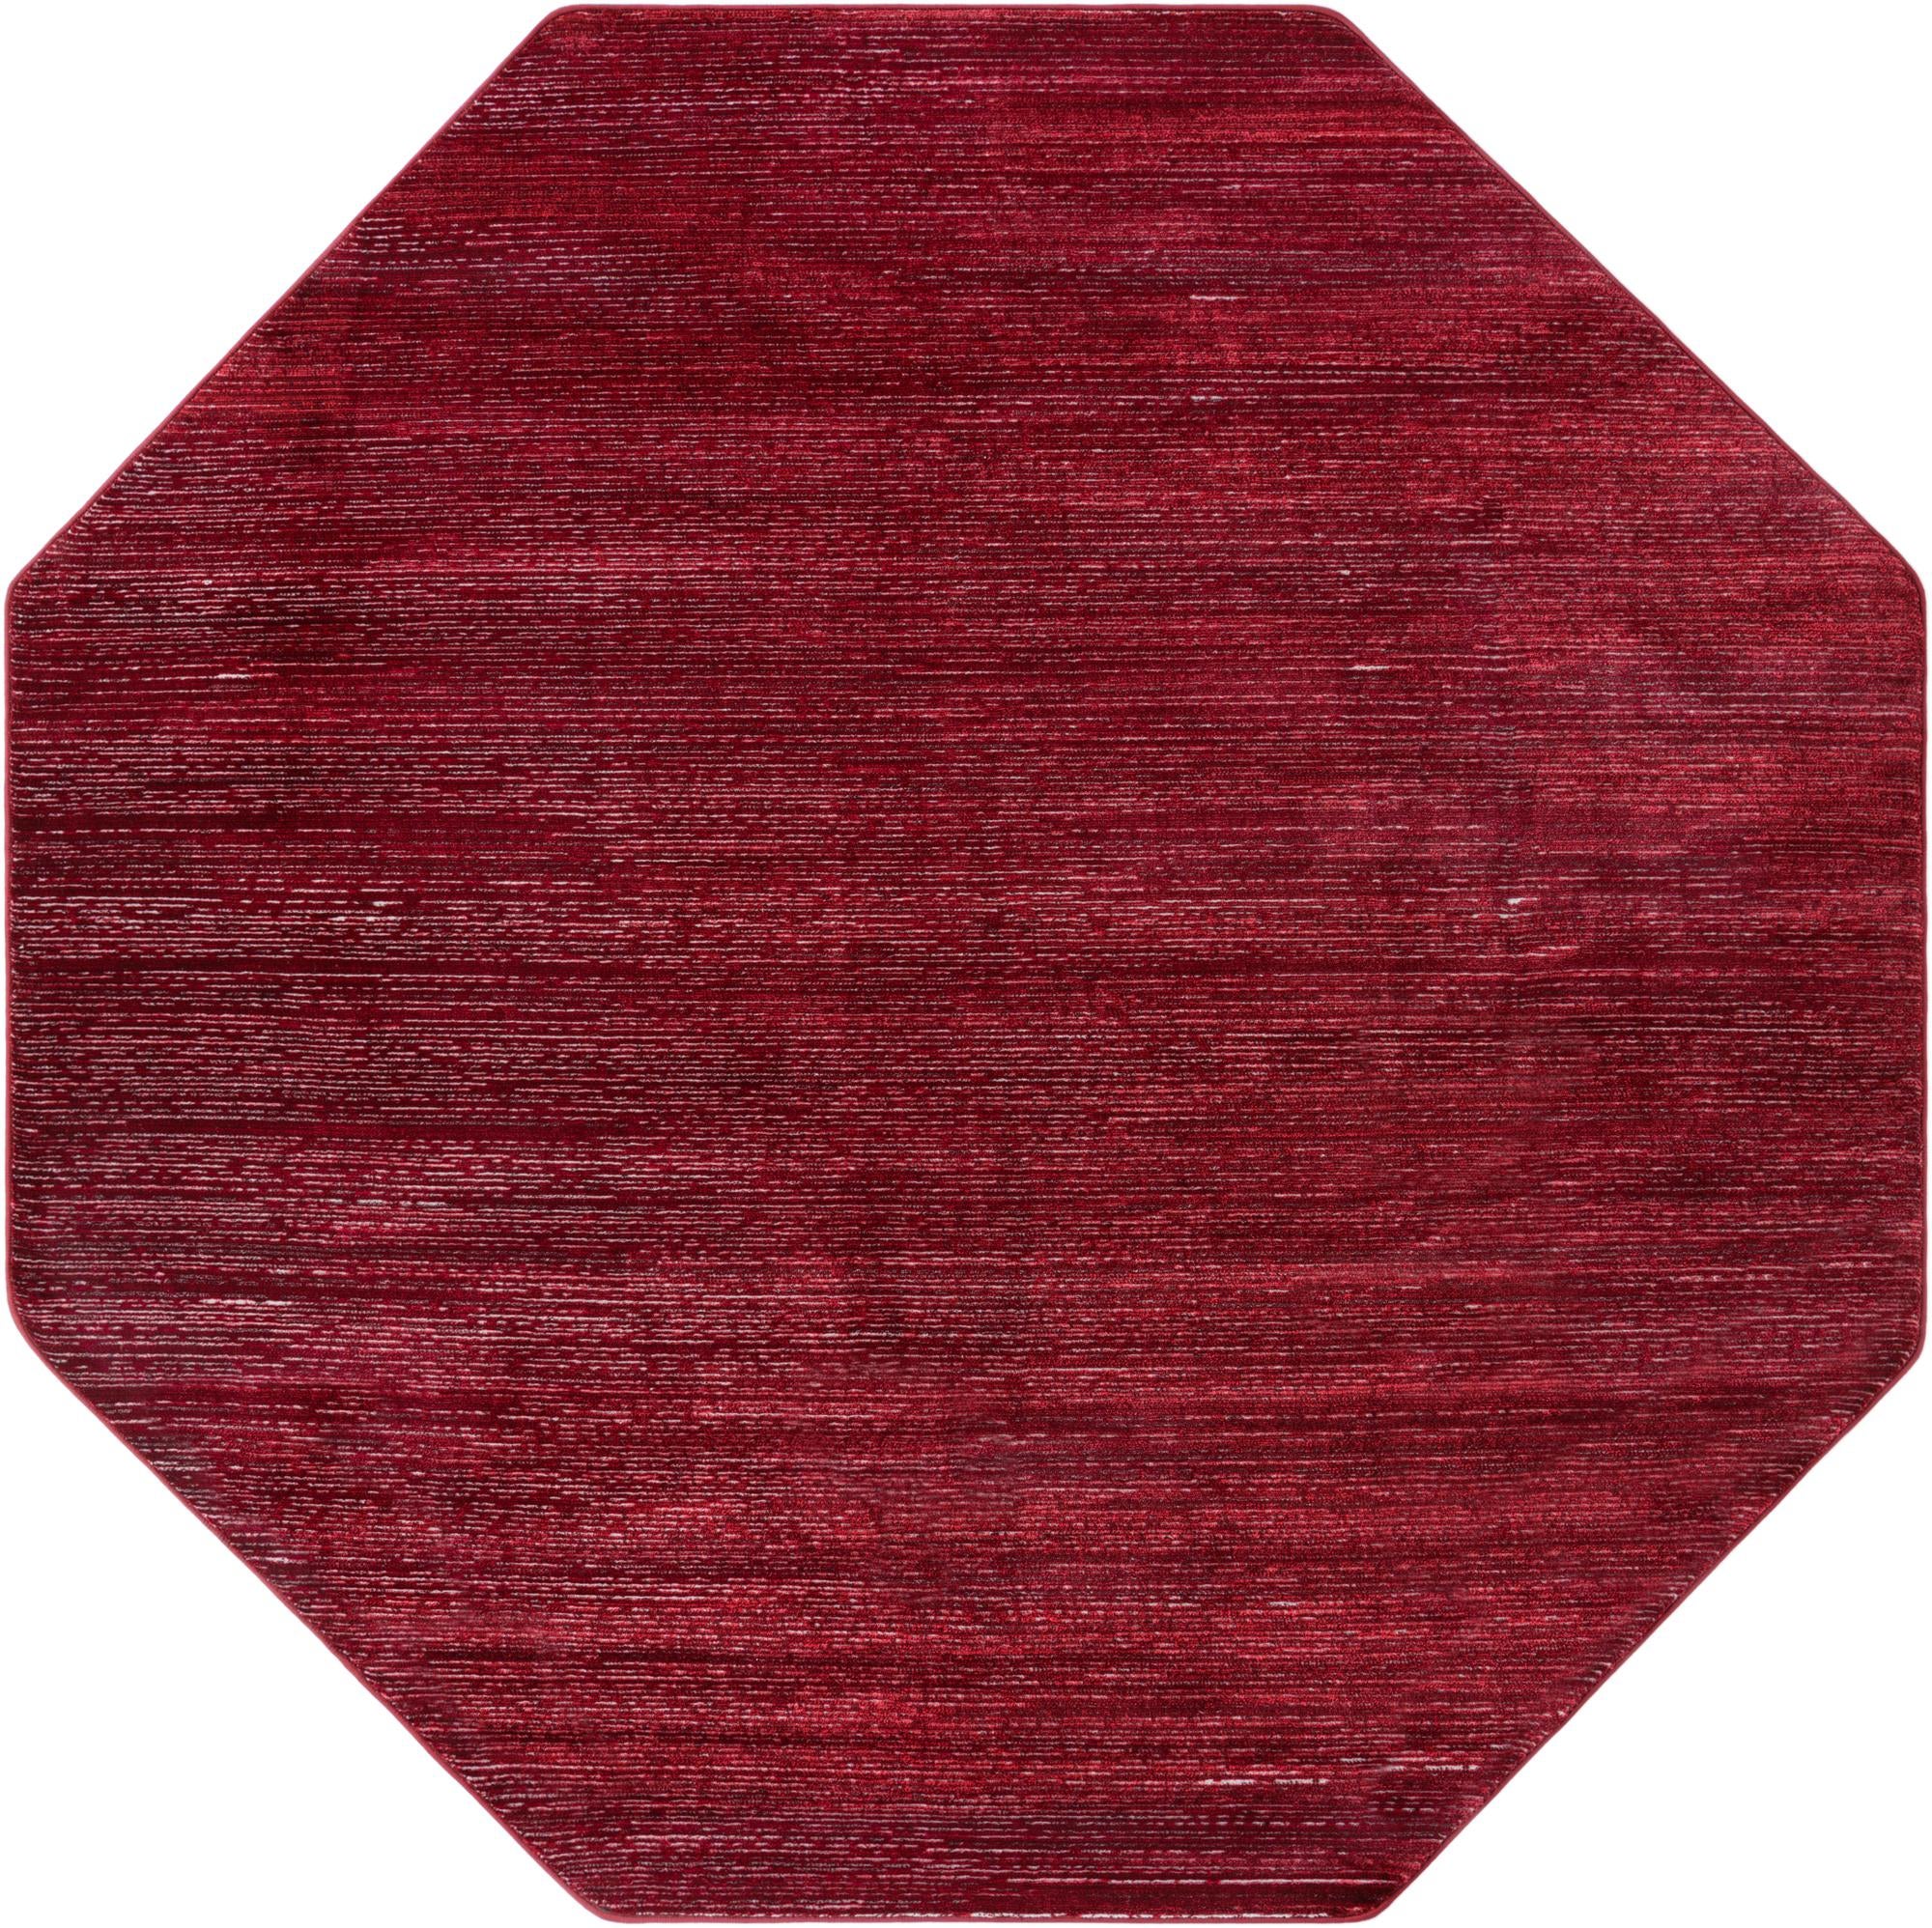 rugpal vrego solid/striped area rug collection